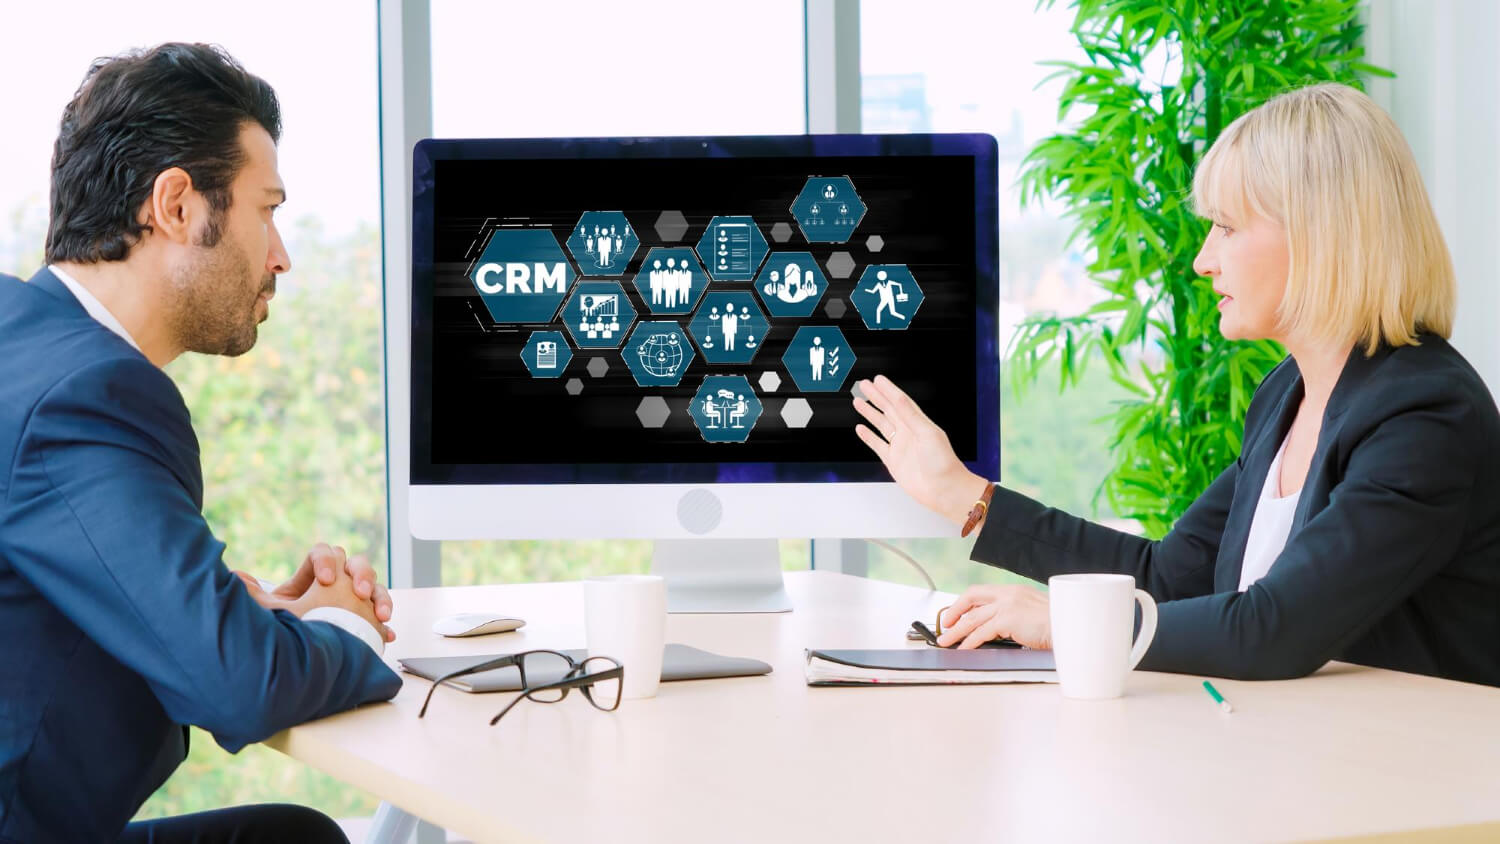 6 Best CRM Software for Hospitals and Medical Businesses